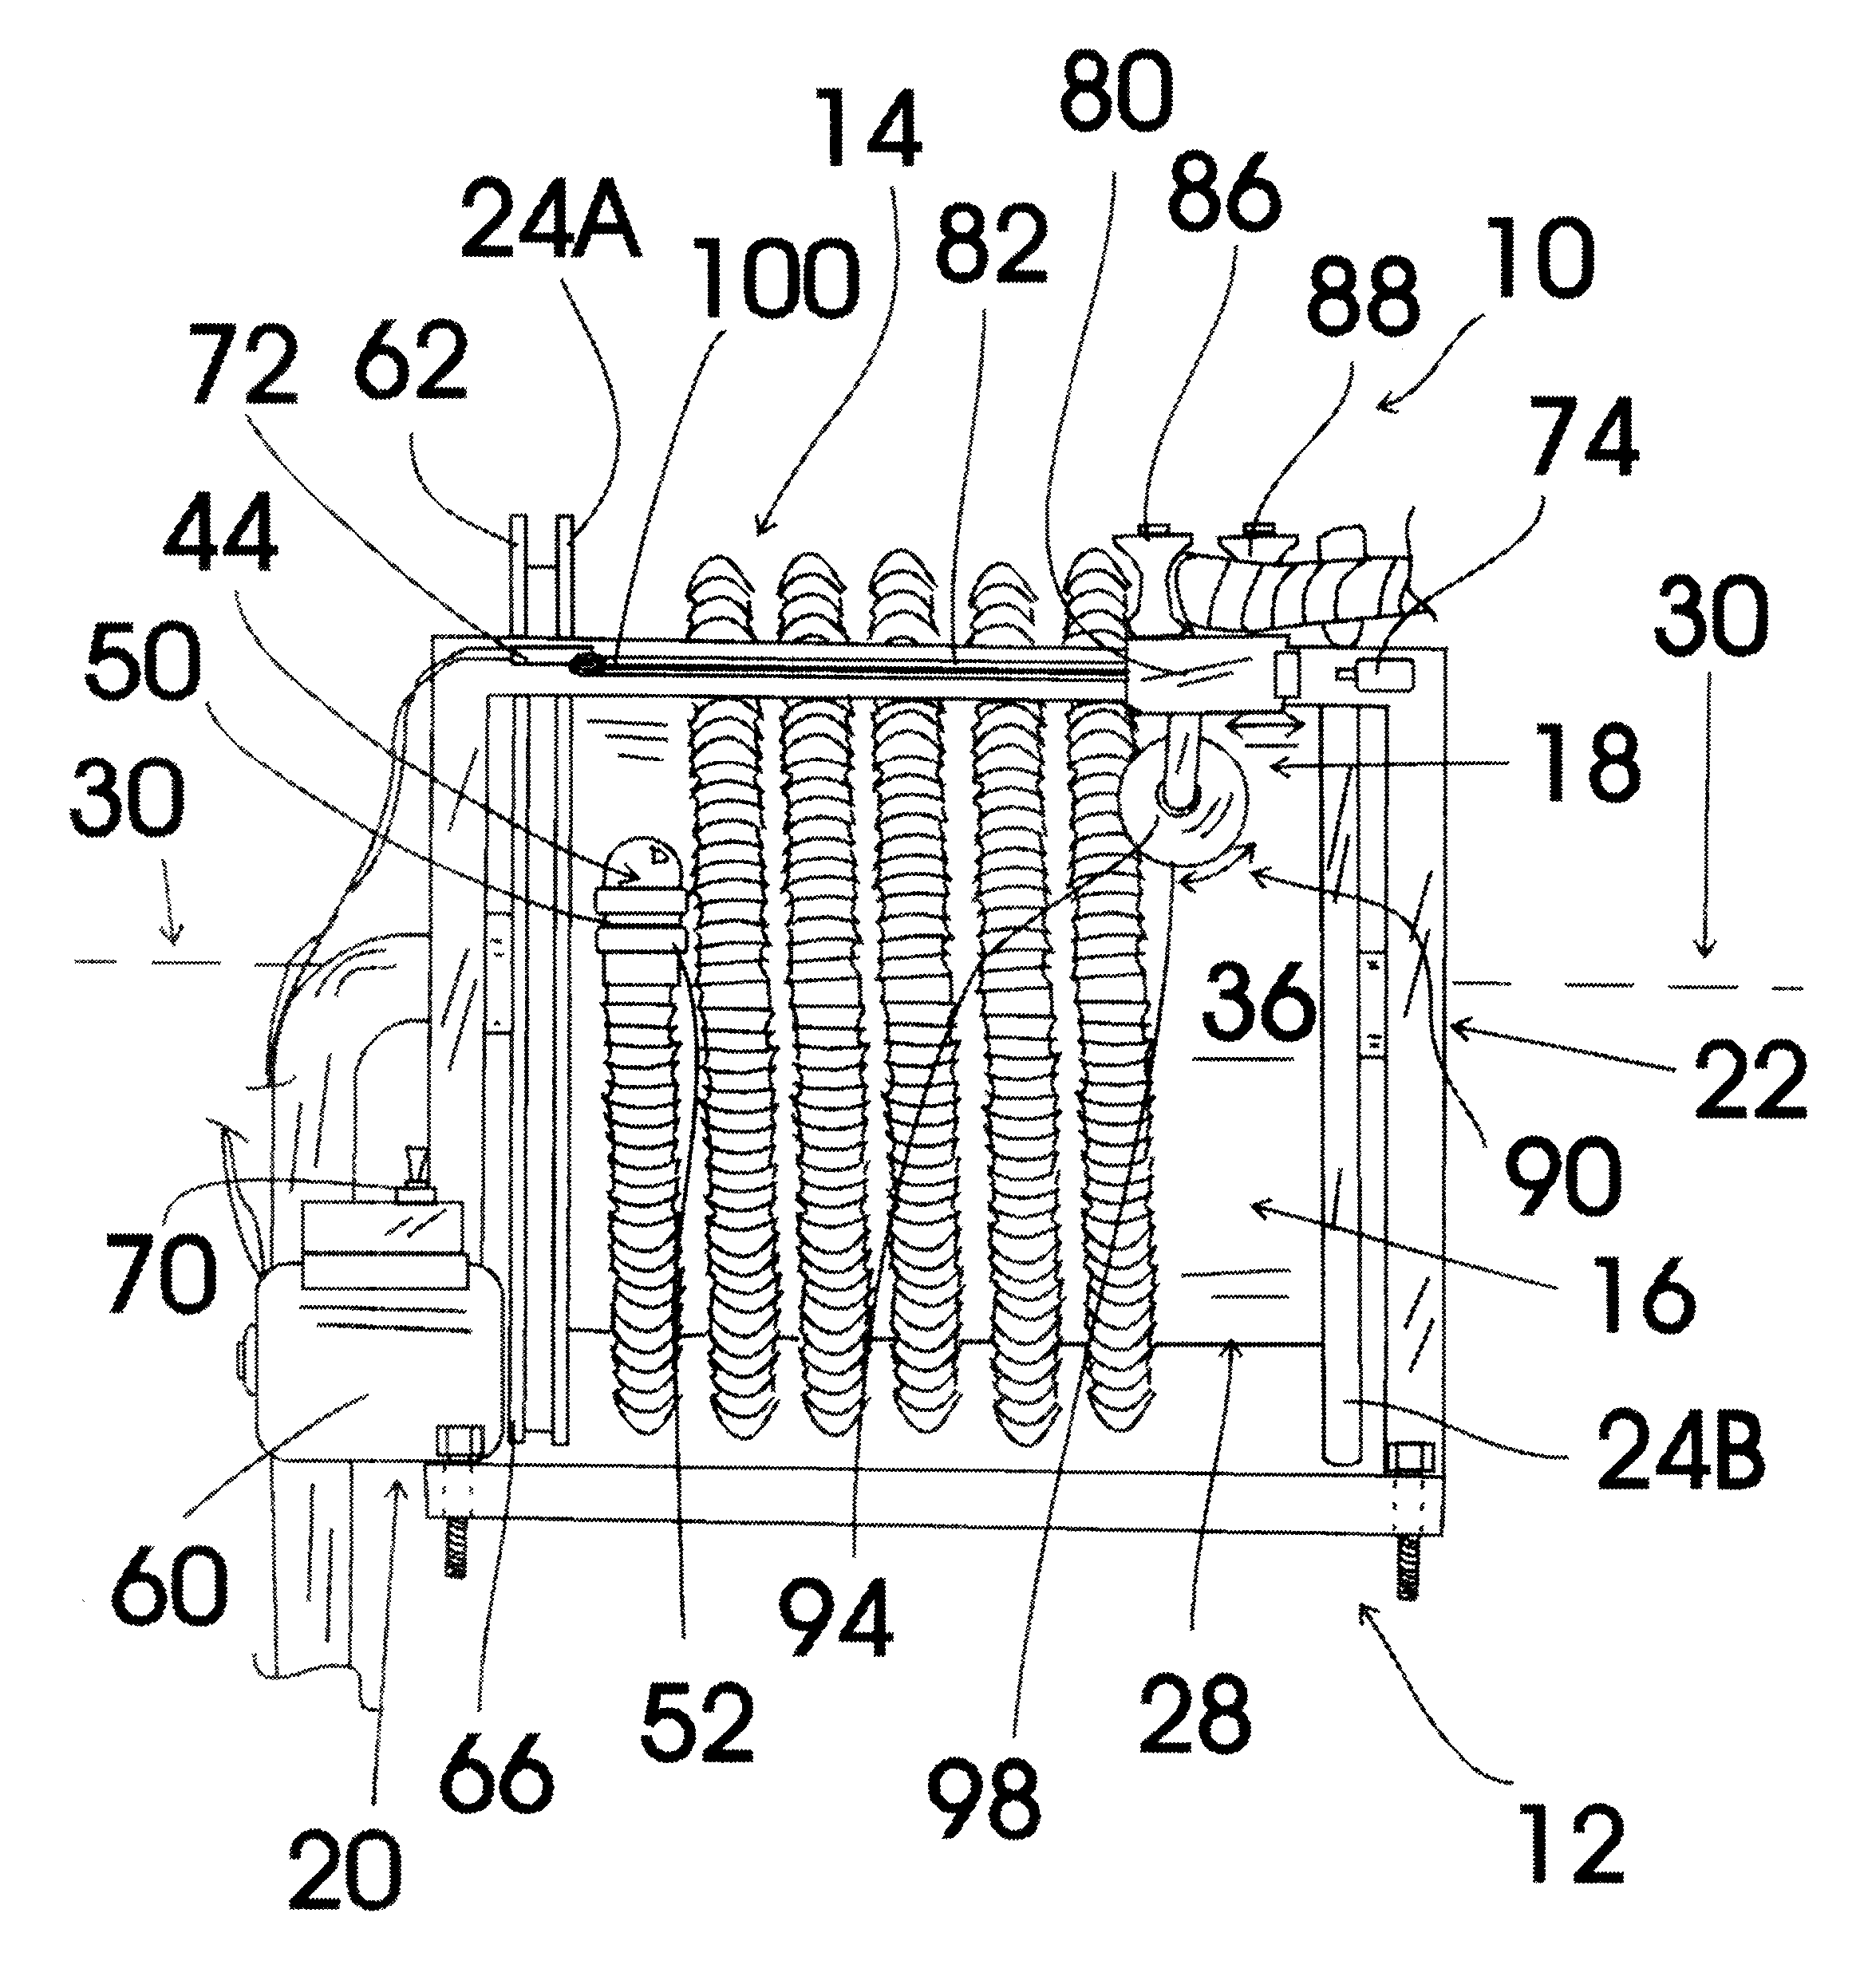 Vacuum hose assembly for a permanently installed building vacuum cleaner system